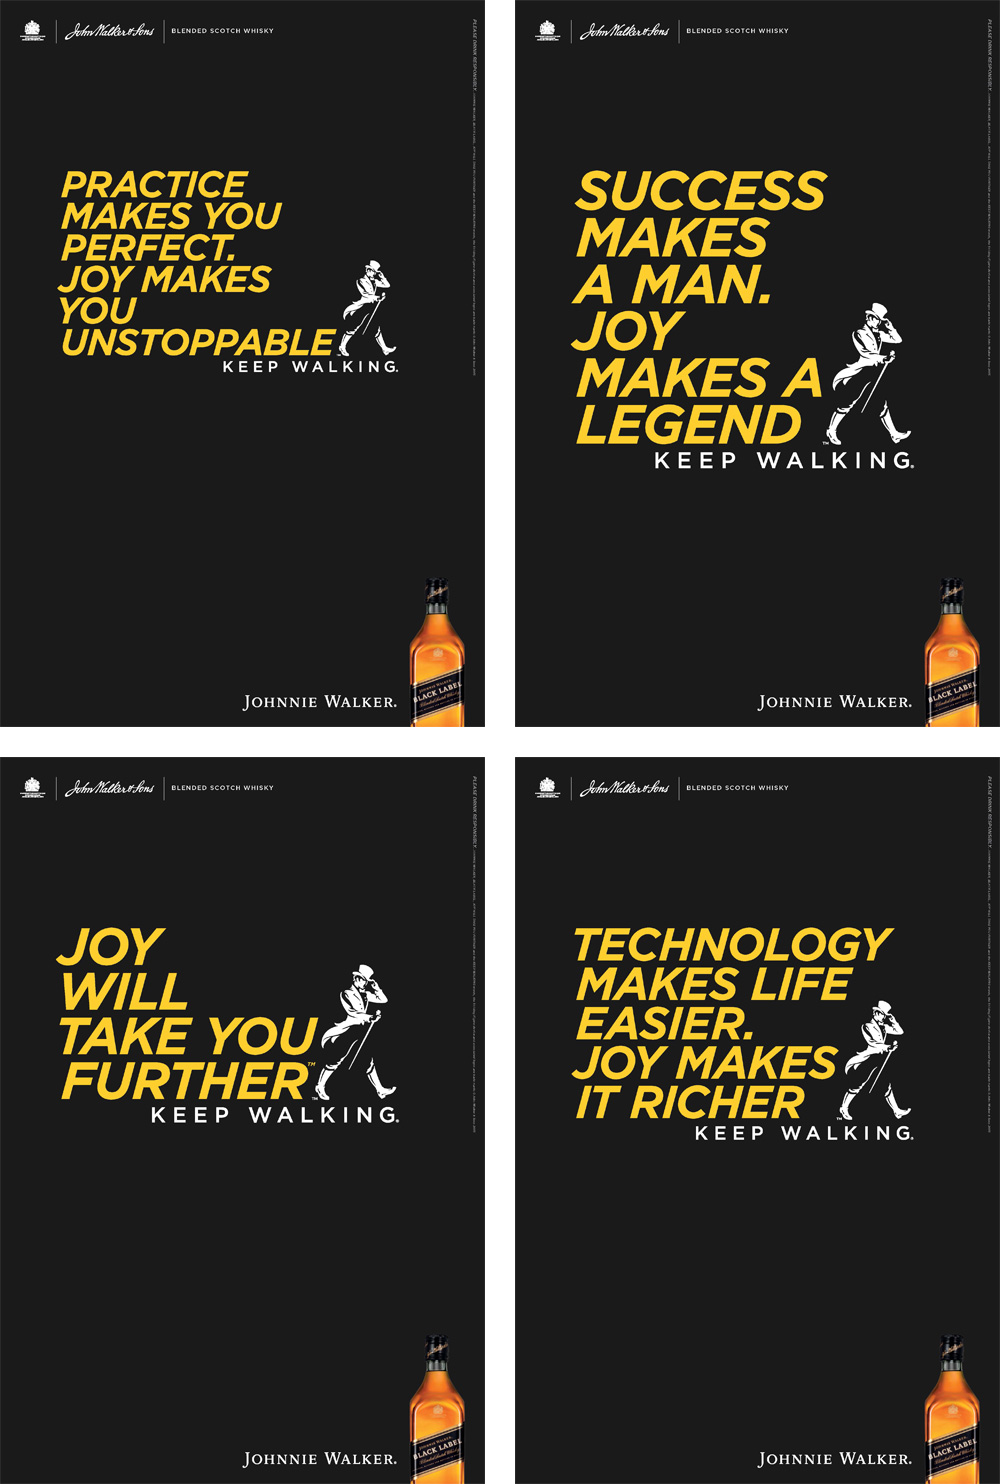 Brand New: New Logo and Global Campaign for Johnnie Walker